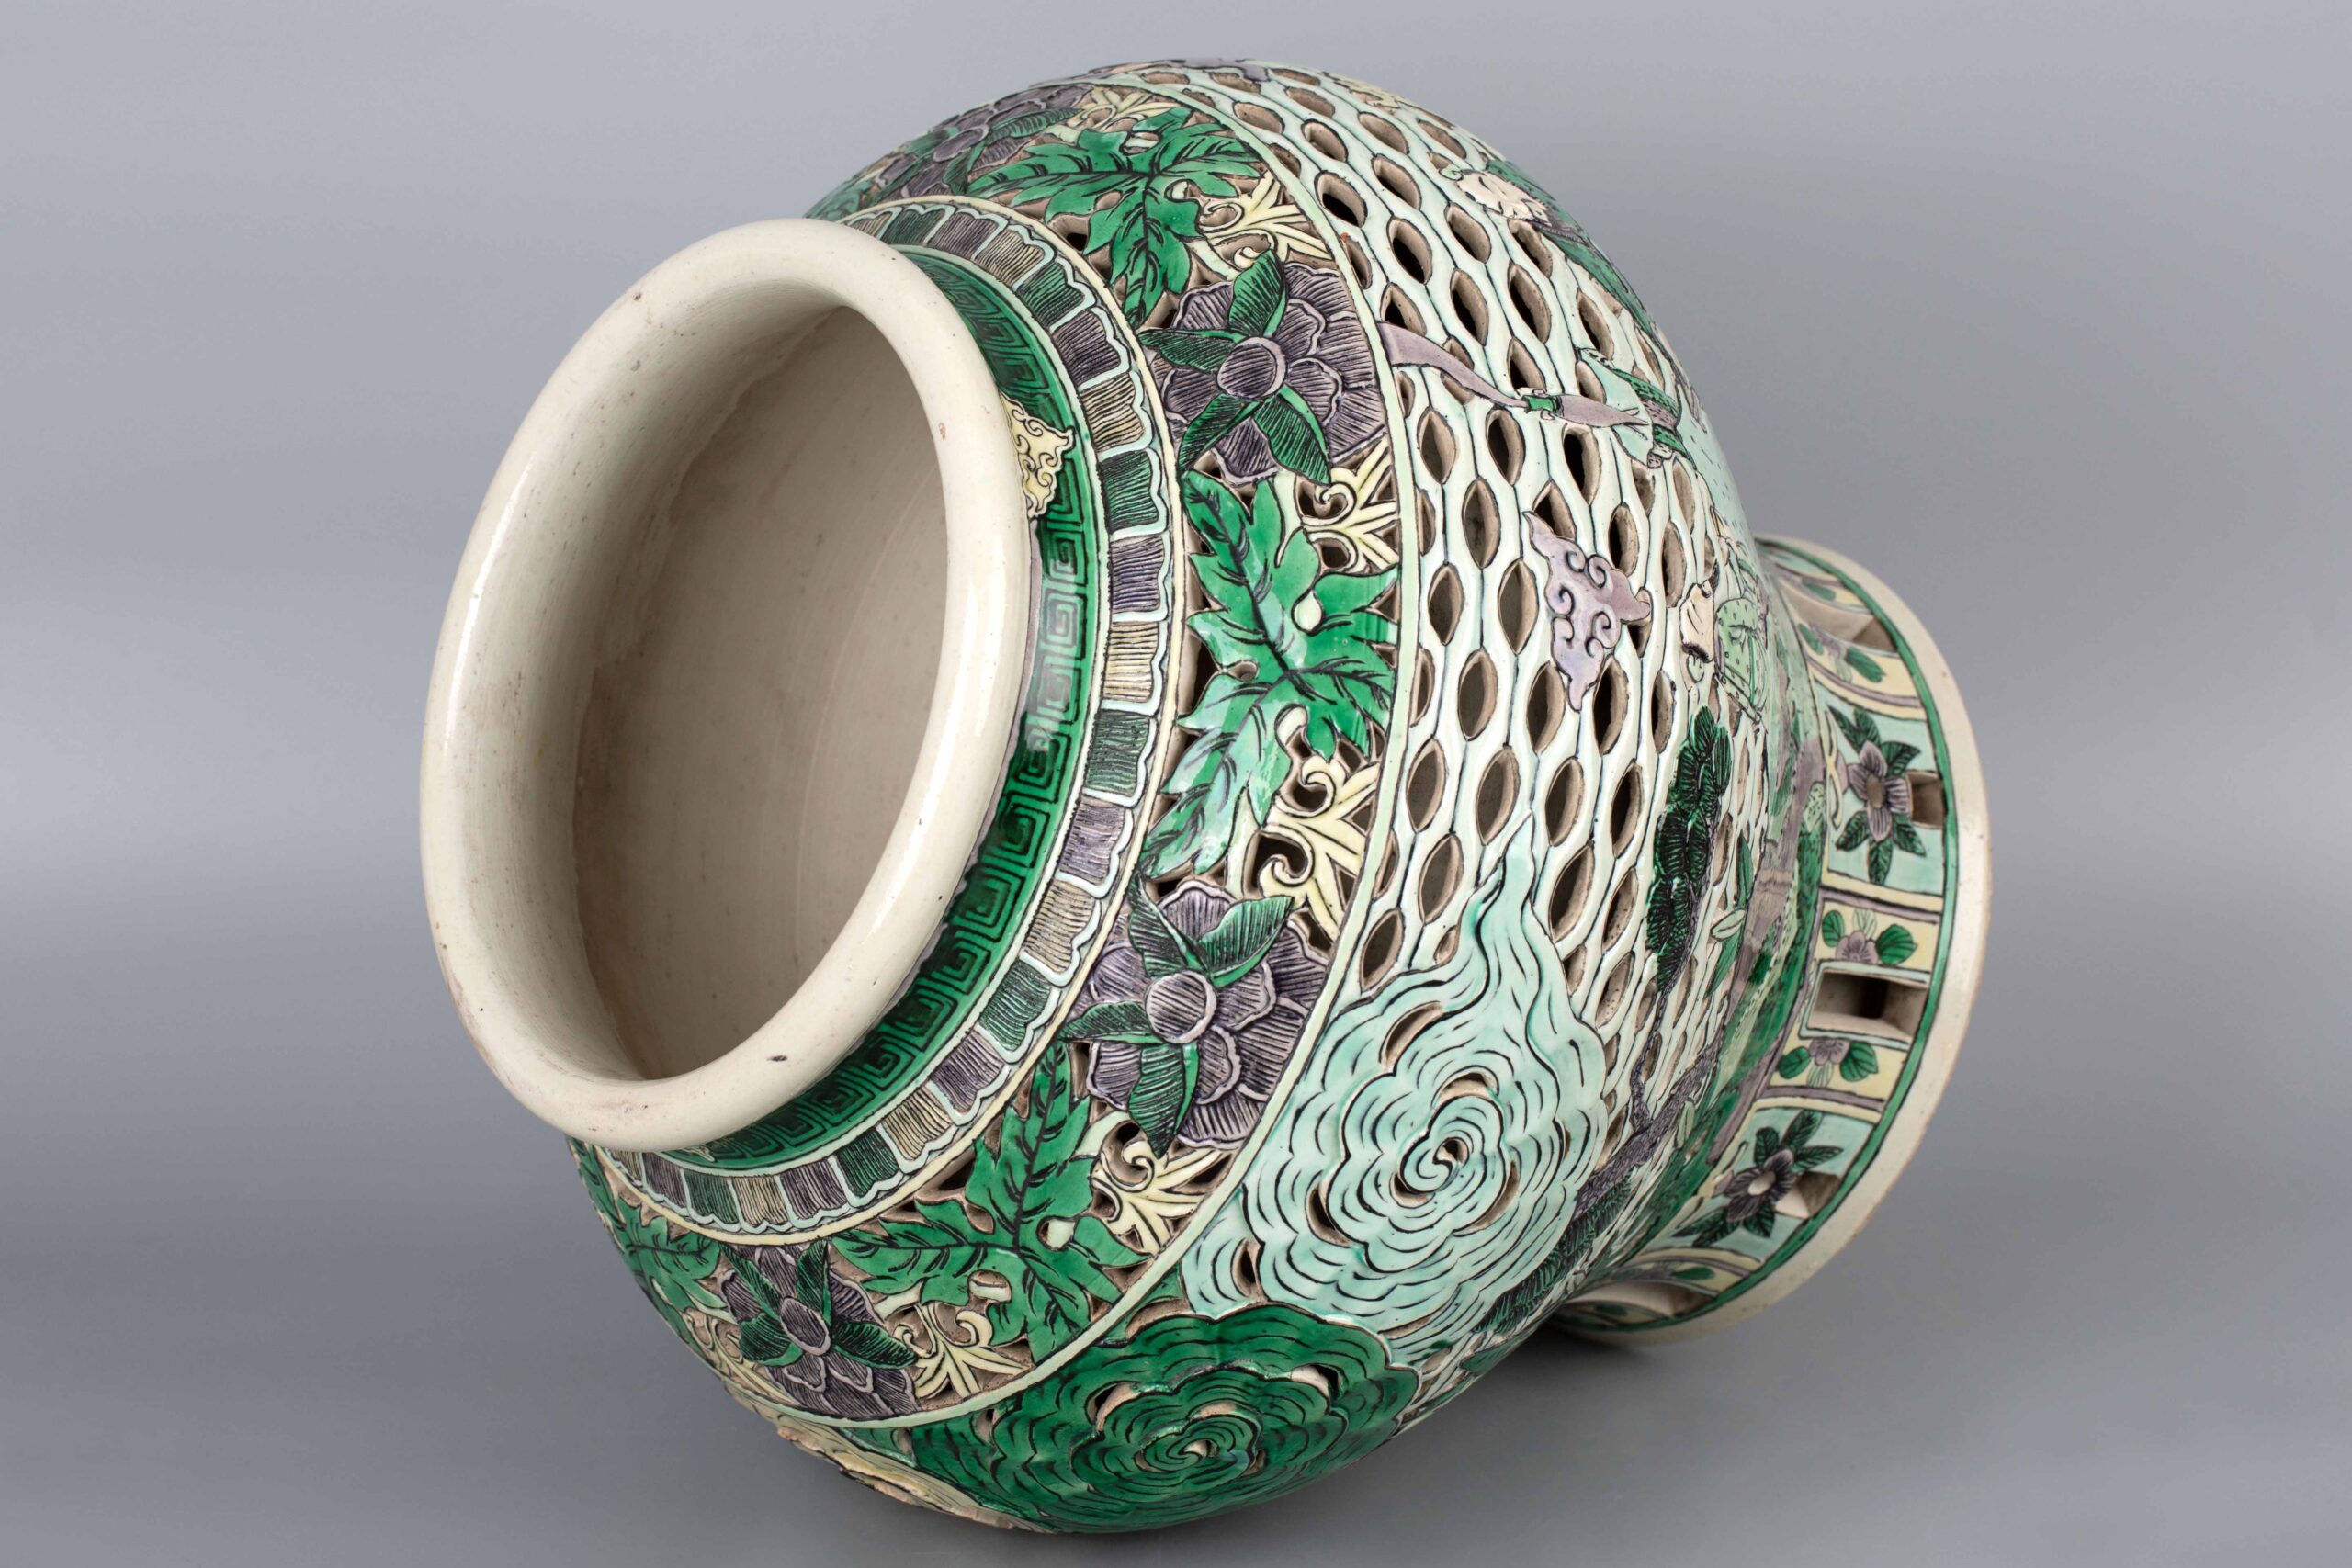 Multicolored hollow carved Jar 19th century五彩洞石，高士，镂空雕 